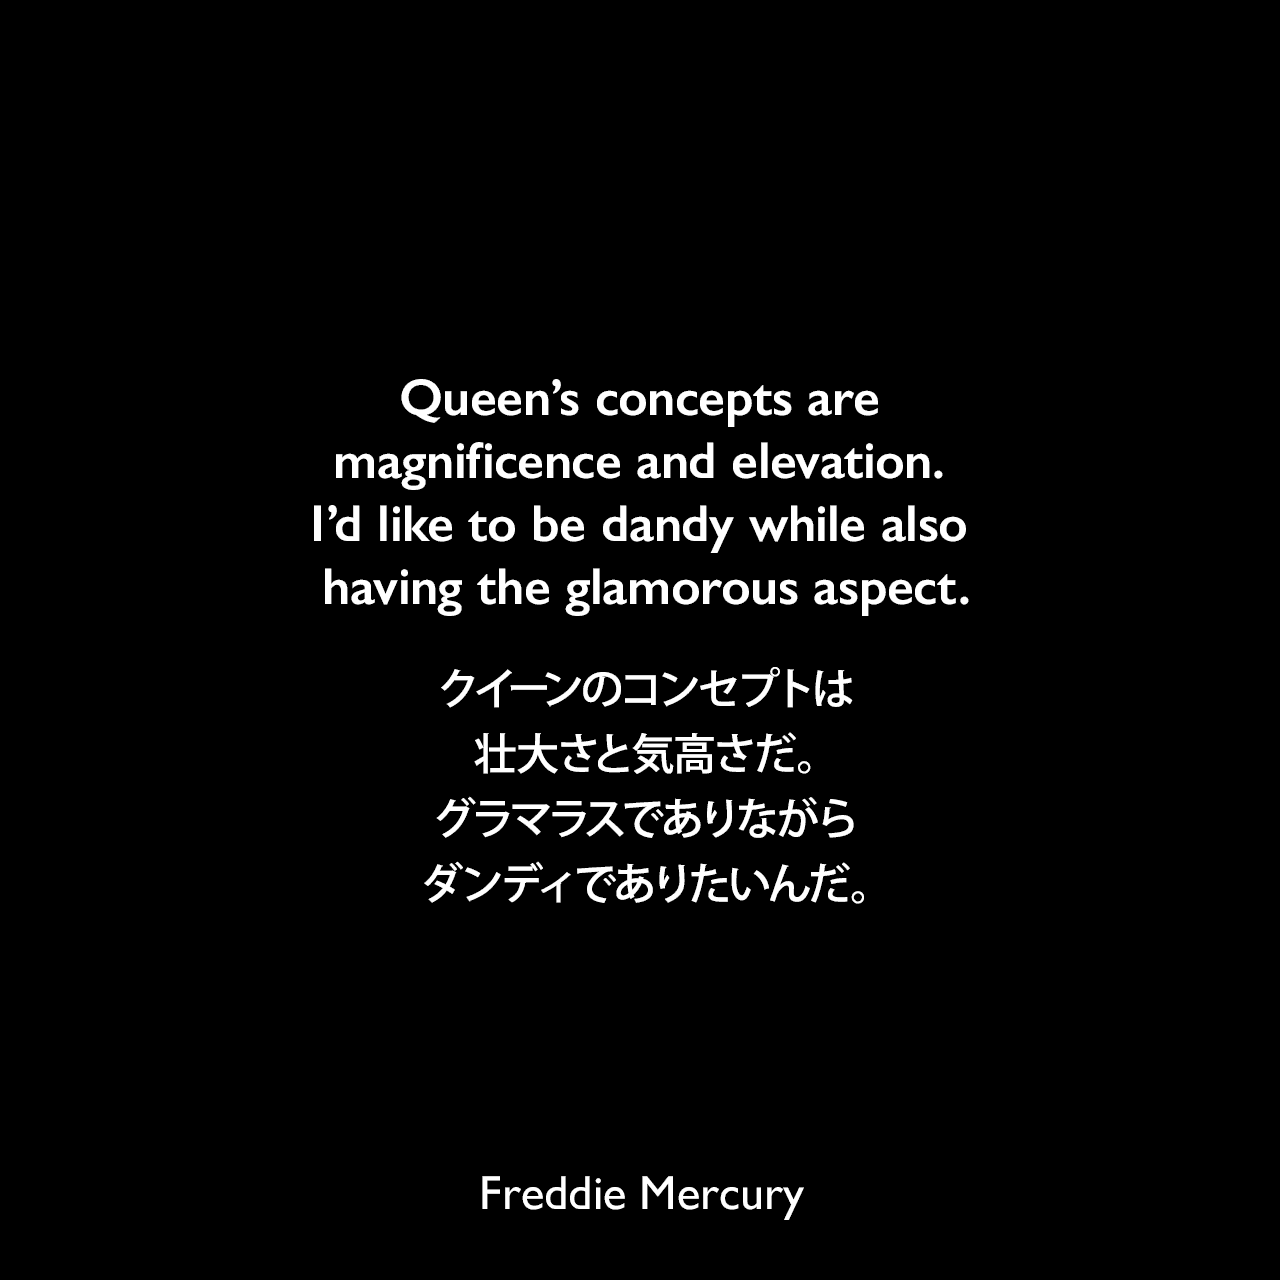 Queen’s concepts are magnificence and elevation. I’d like to be dandy while also having the glamorous aspect.クイーンのコンセプトは壮大さと気高さだ。グラマラスでありながら、ダンディでありたいんだ。Freddie Mercury